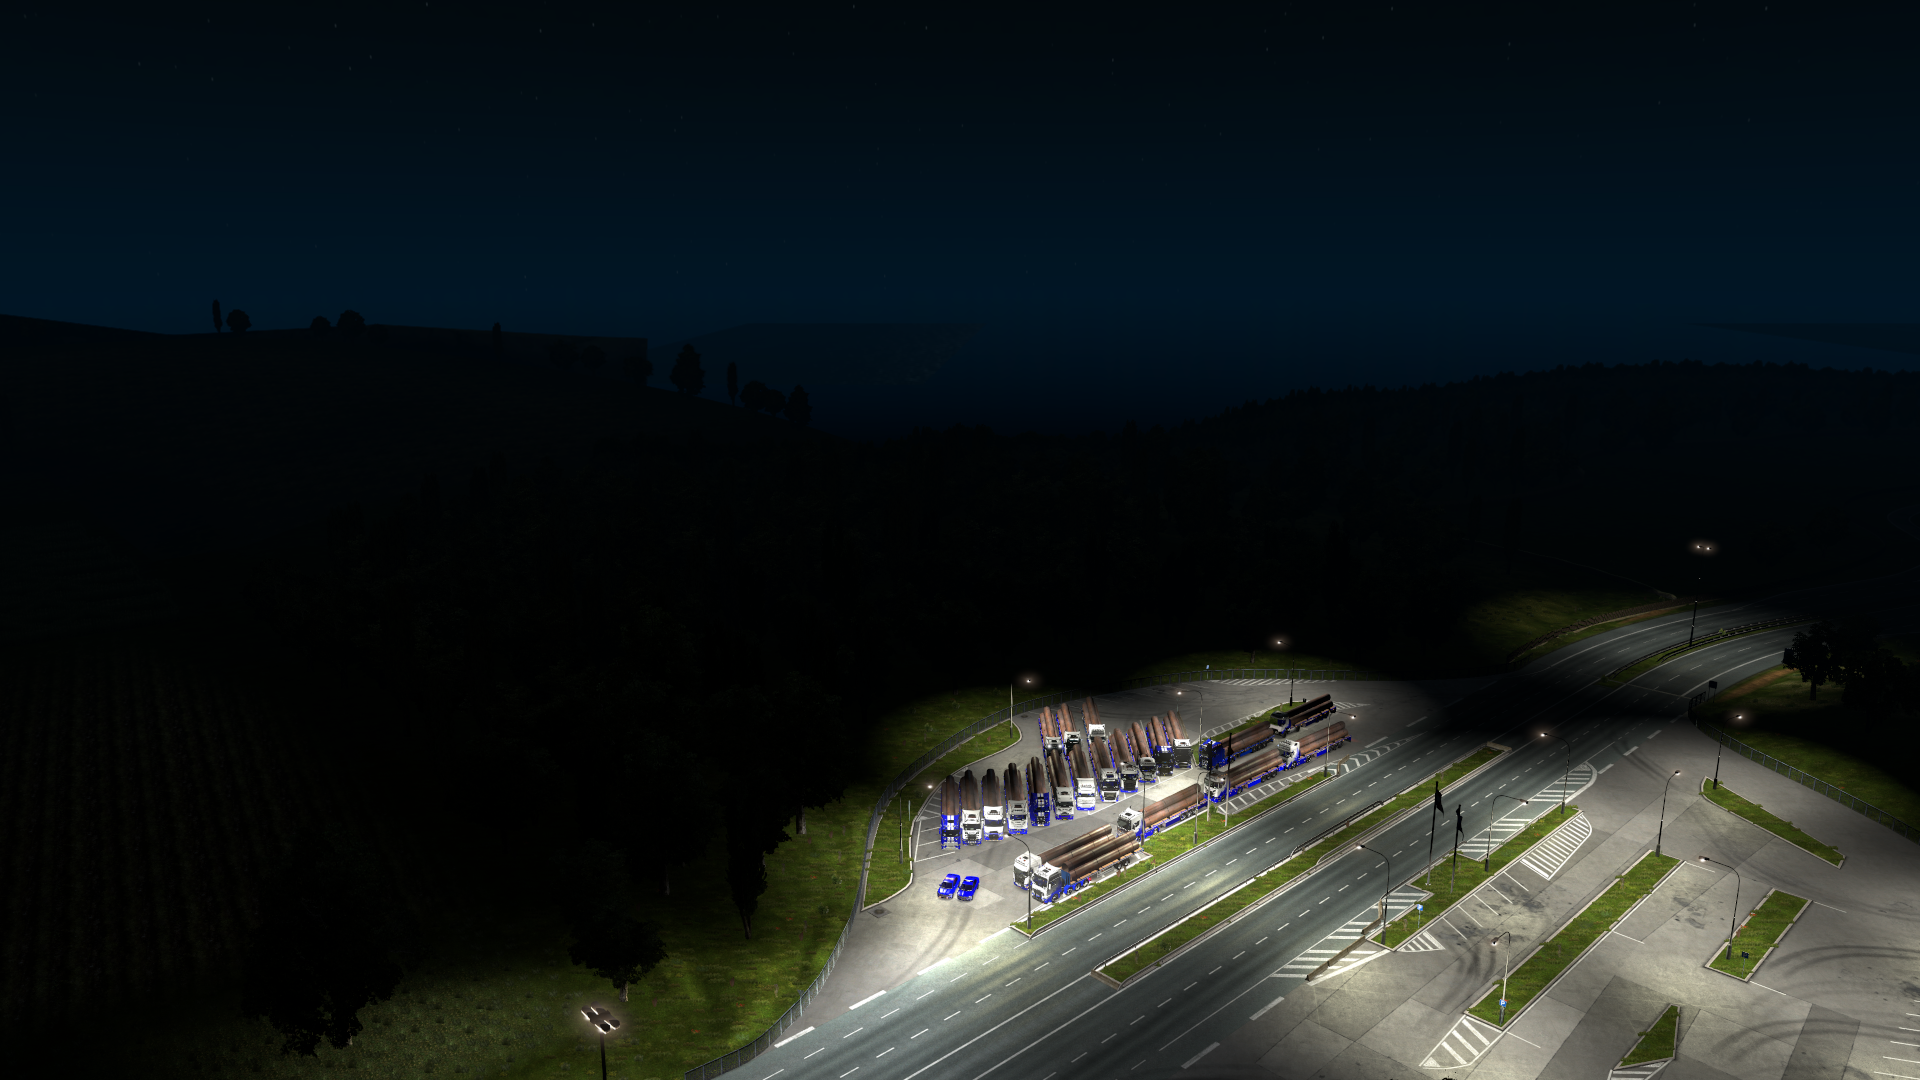 ets2_20200417_234532_00.png